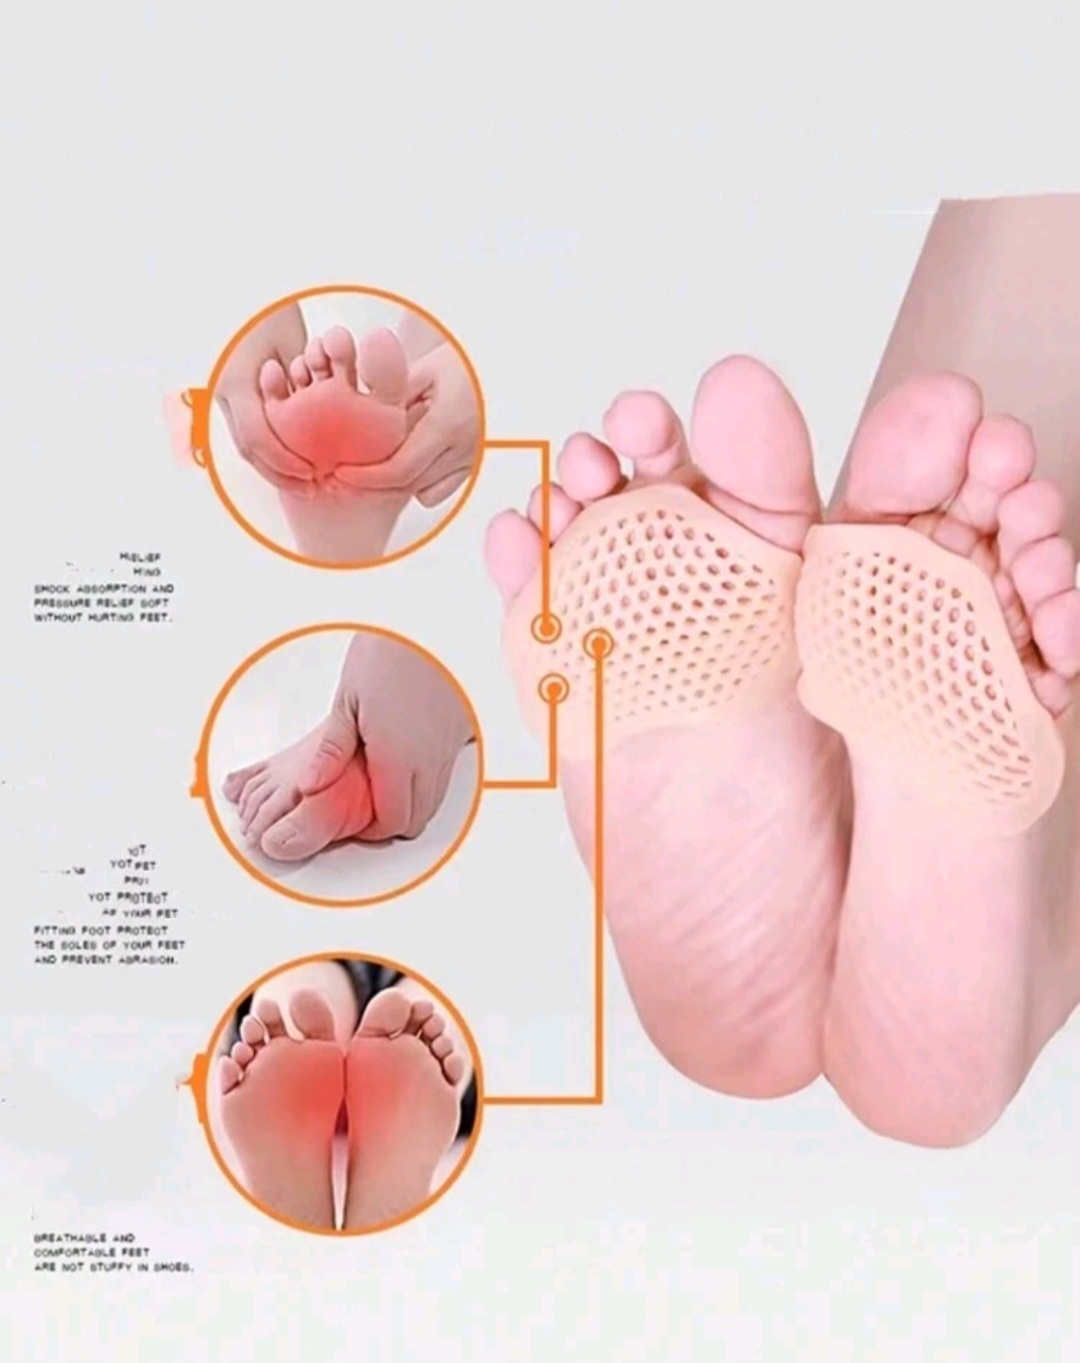 A Pair Of Silica Gel Toe Separators Pain Relief Foot Cushions Massage Shoe Insoles Forefoot Socks Foot Care Tool For Women Soft Comfortable Breathable Silicone Cushion